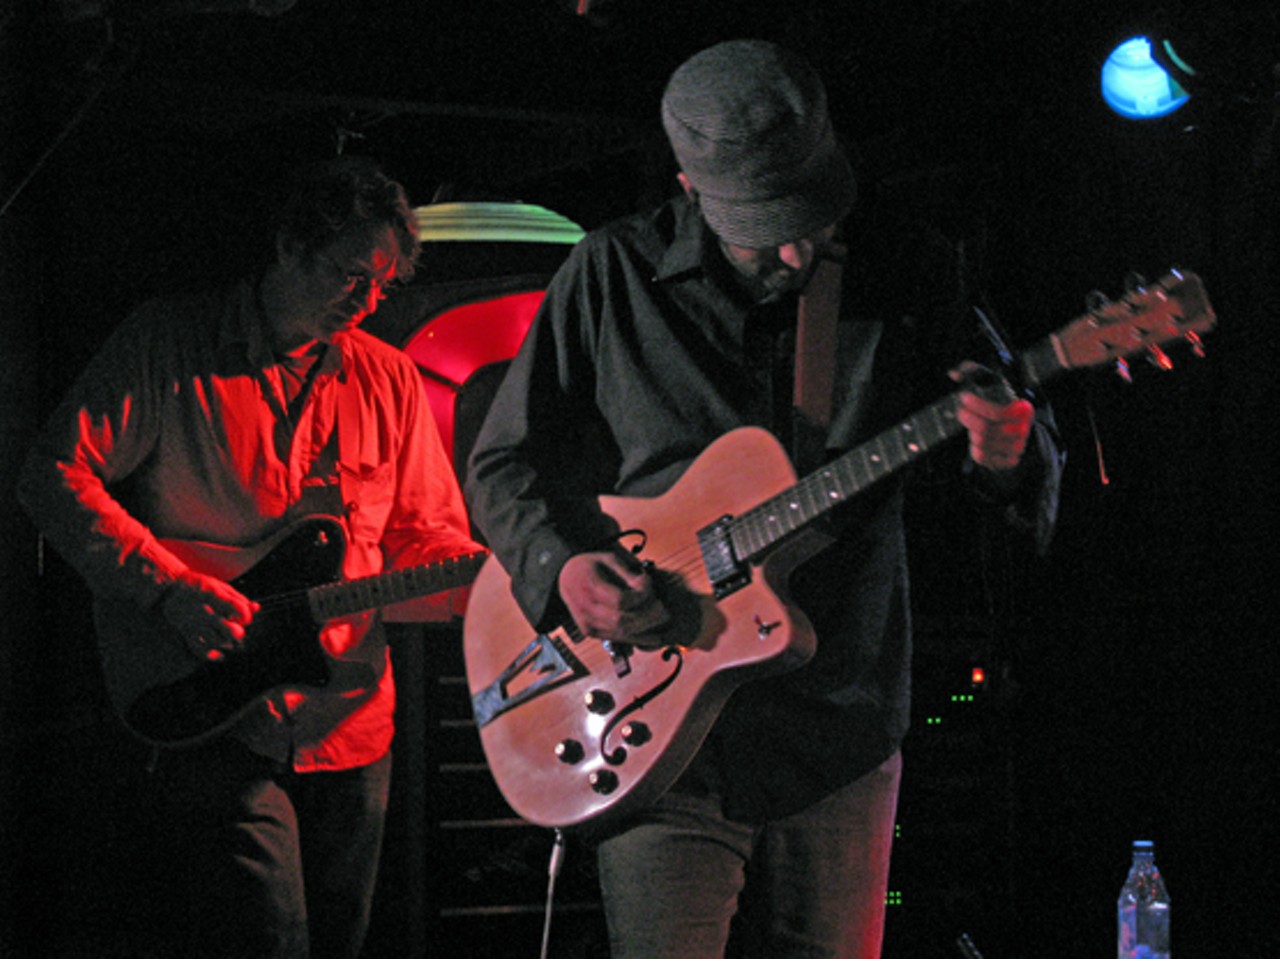 Stoltz, center, and his five-piece band played the Blueberry Hill Duck Room on March 18, their second show since playing six gigs in three days at South By Southwest music festival in Austin, Texas.